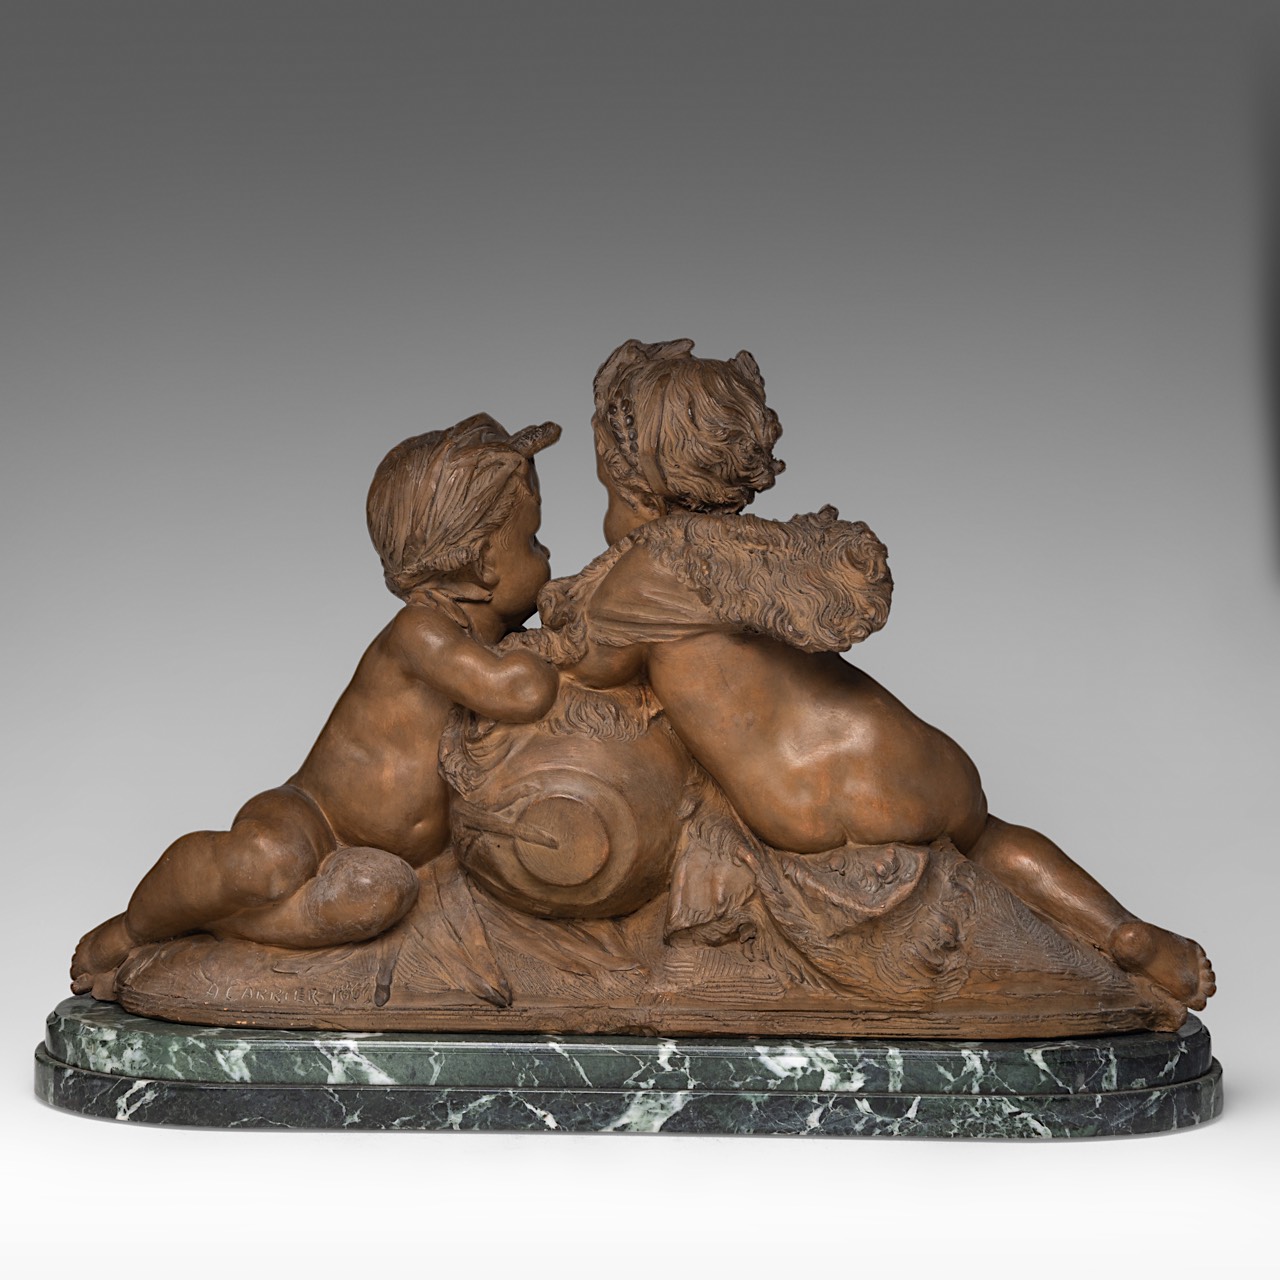 Carrier-Belleuse (1824-1887), two putti by the fountain, terracotta on a marble base, H 43 - W 68 cm - Image 5 of 10